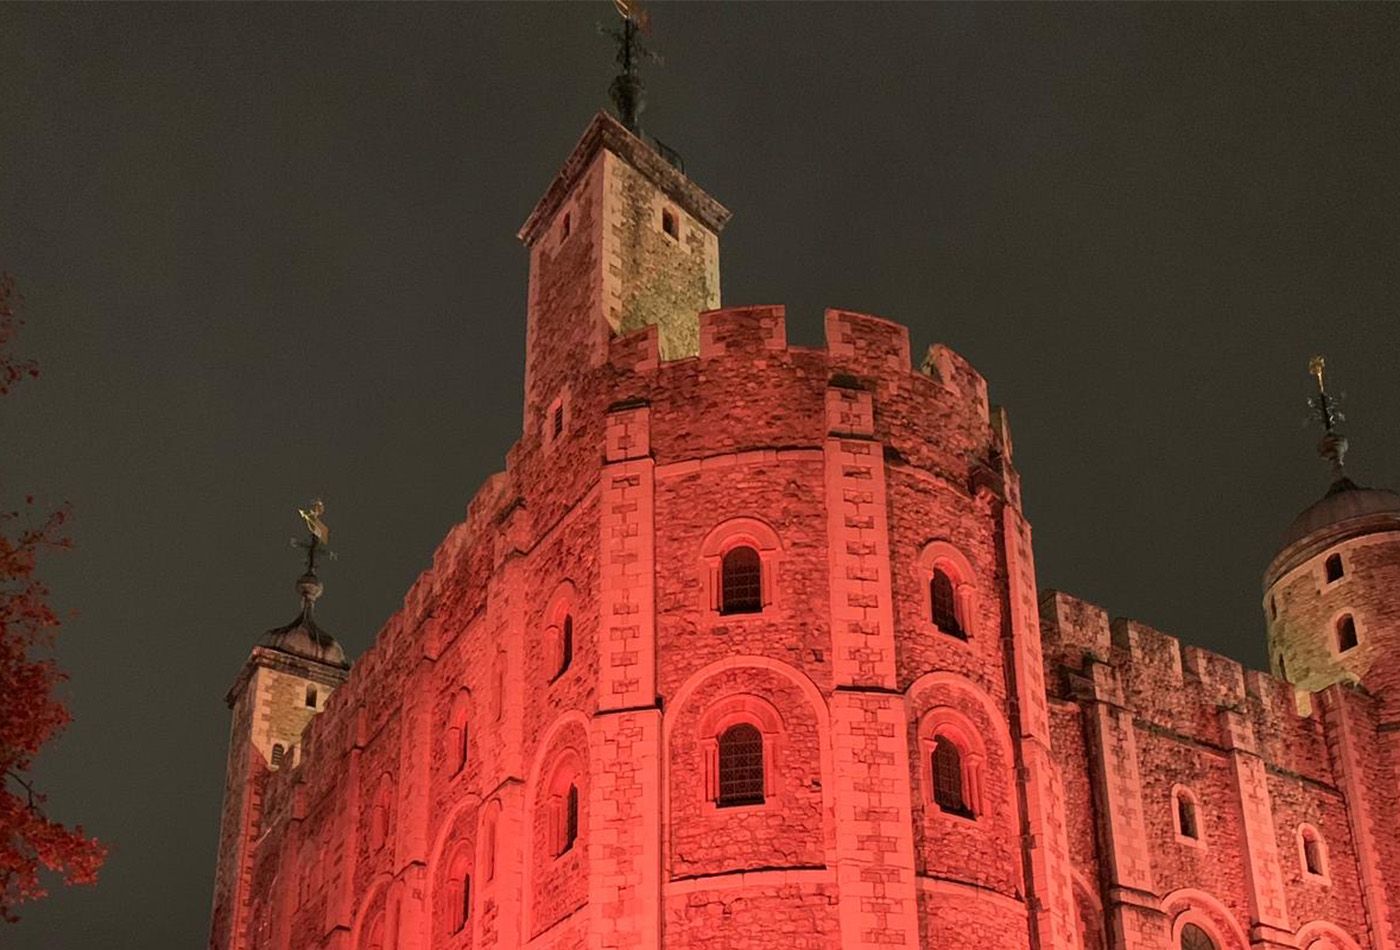 Mighty stone tower at night, lit up in red